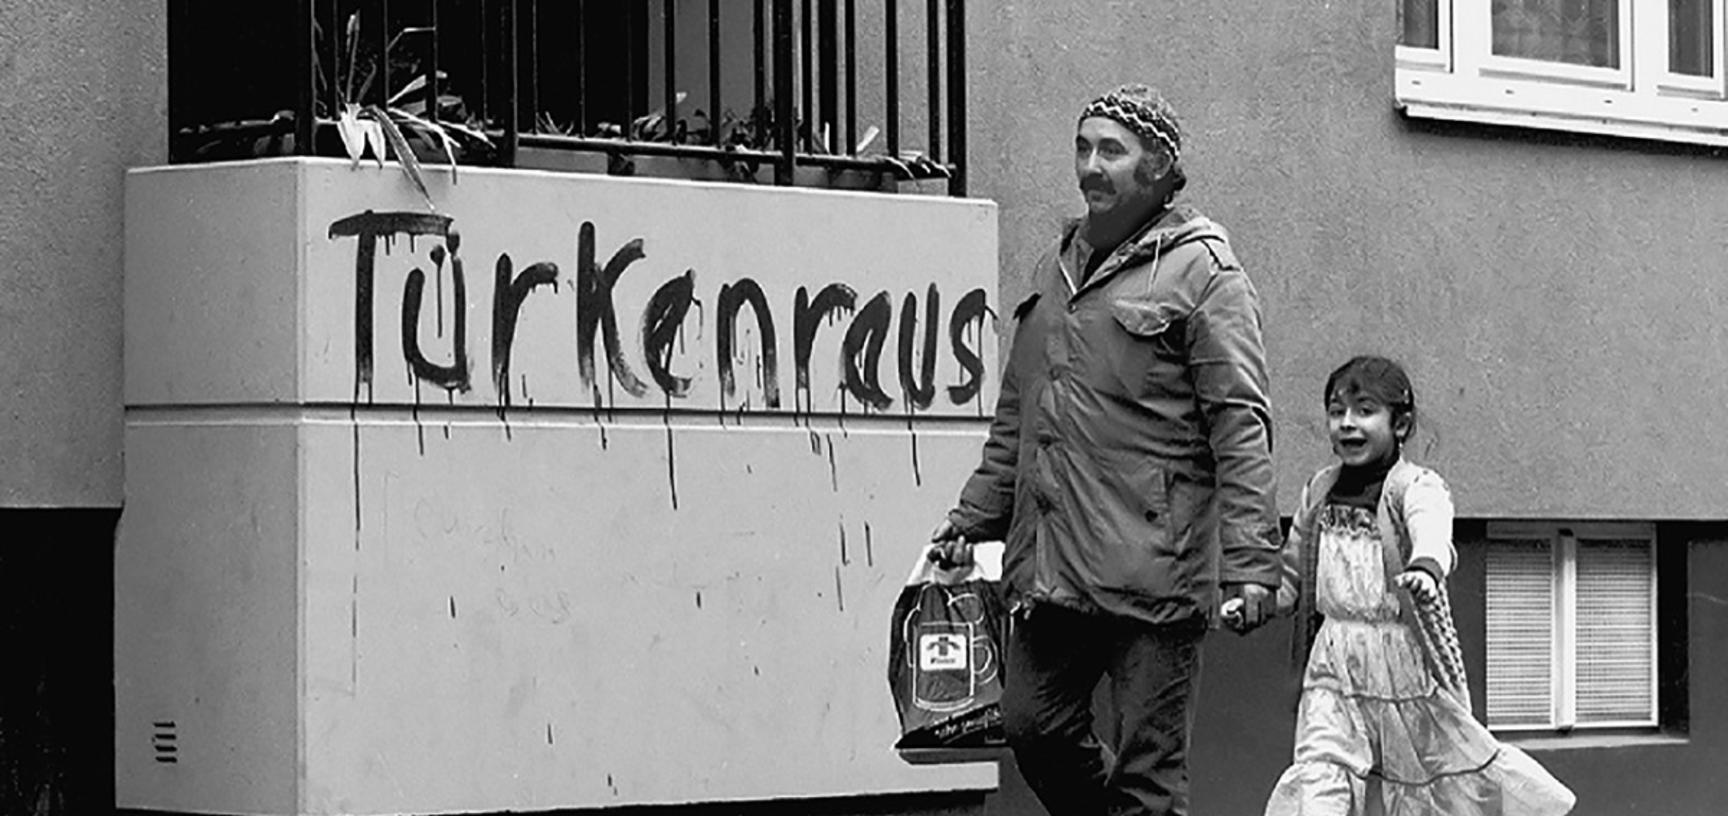 Man and little girl walking past a balcony with "Turkenraus" graffiti